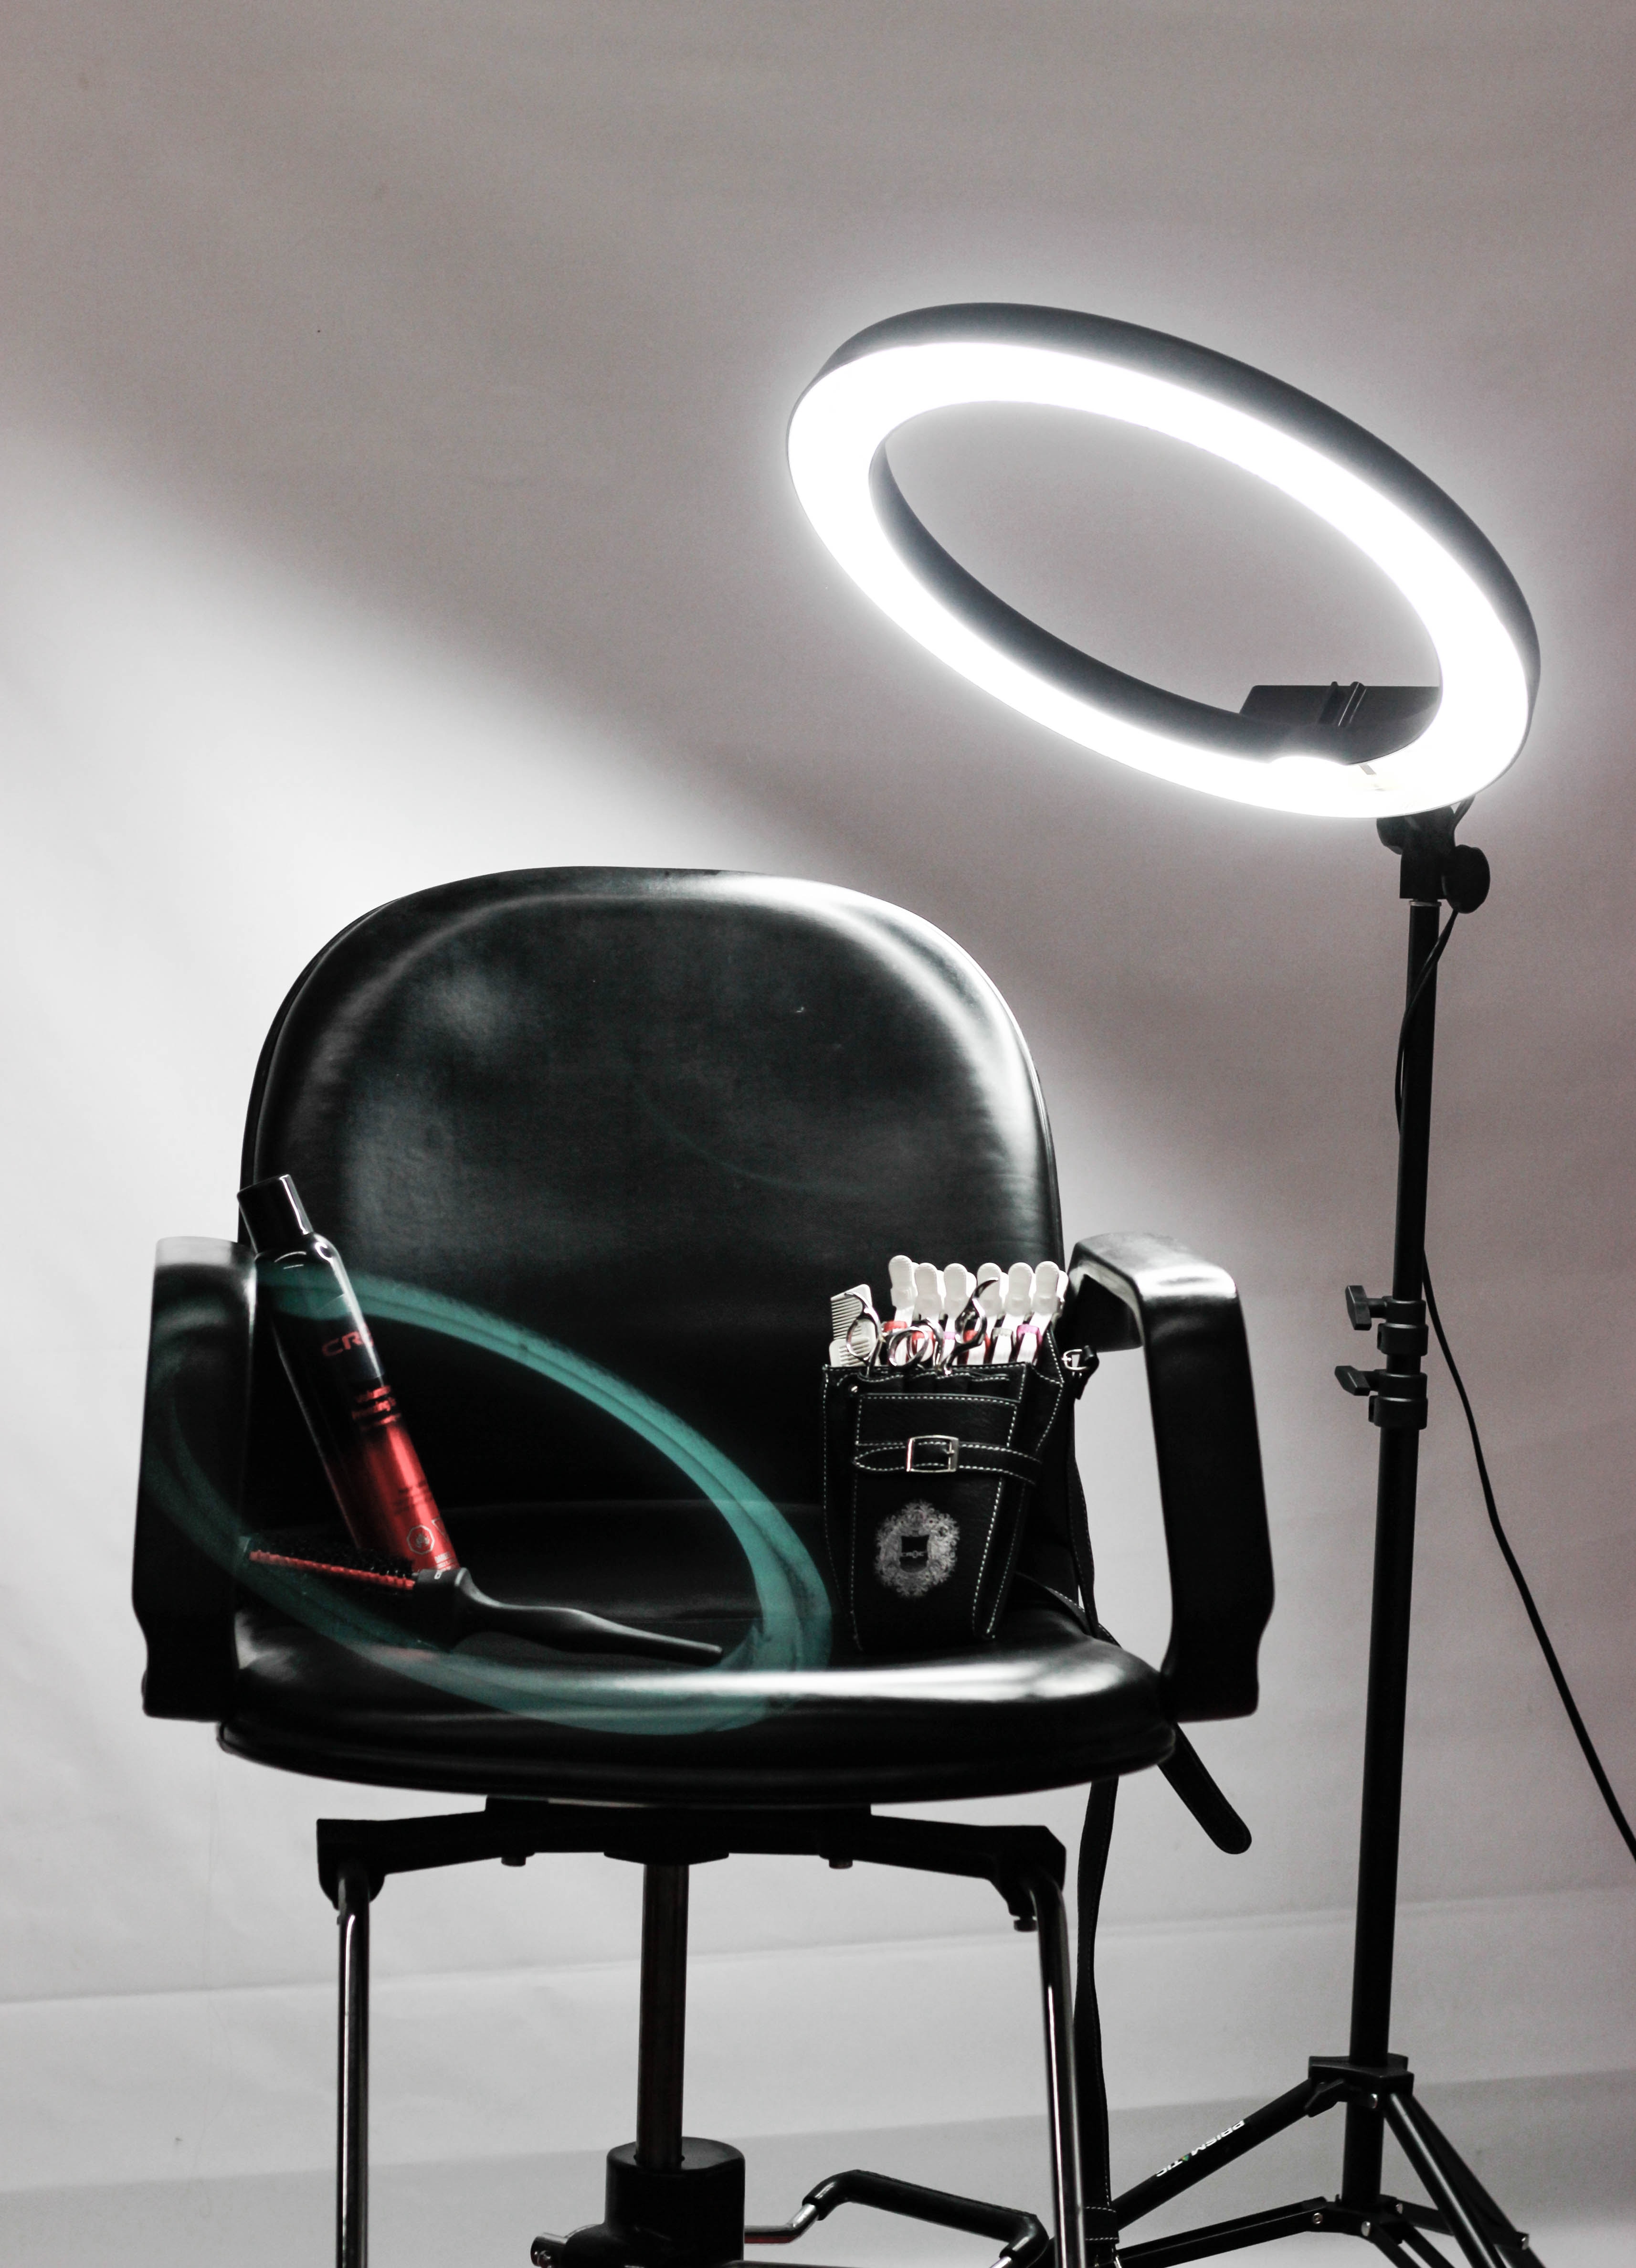 Ring lamp and chair for hair stylist client